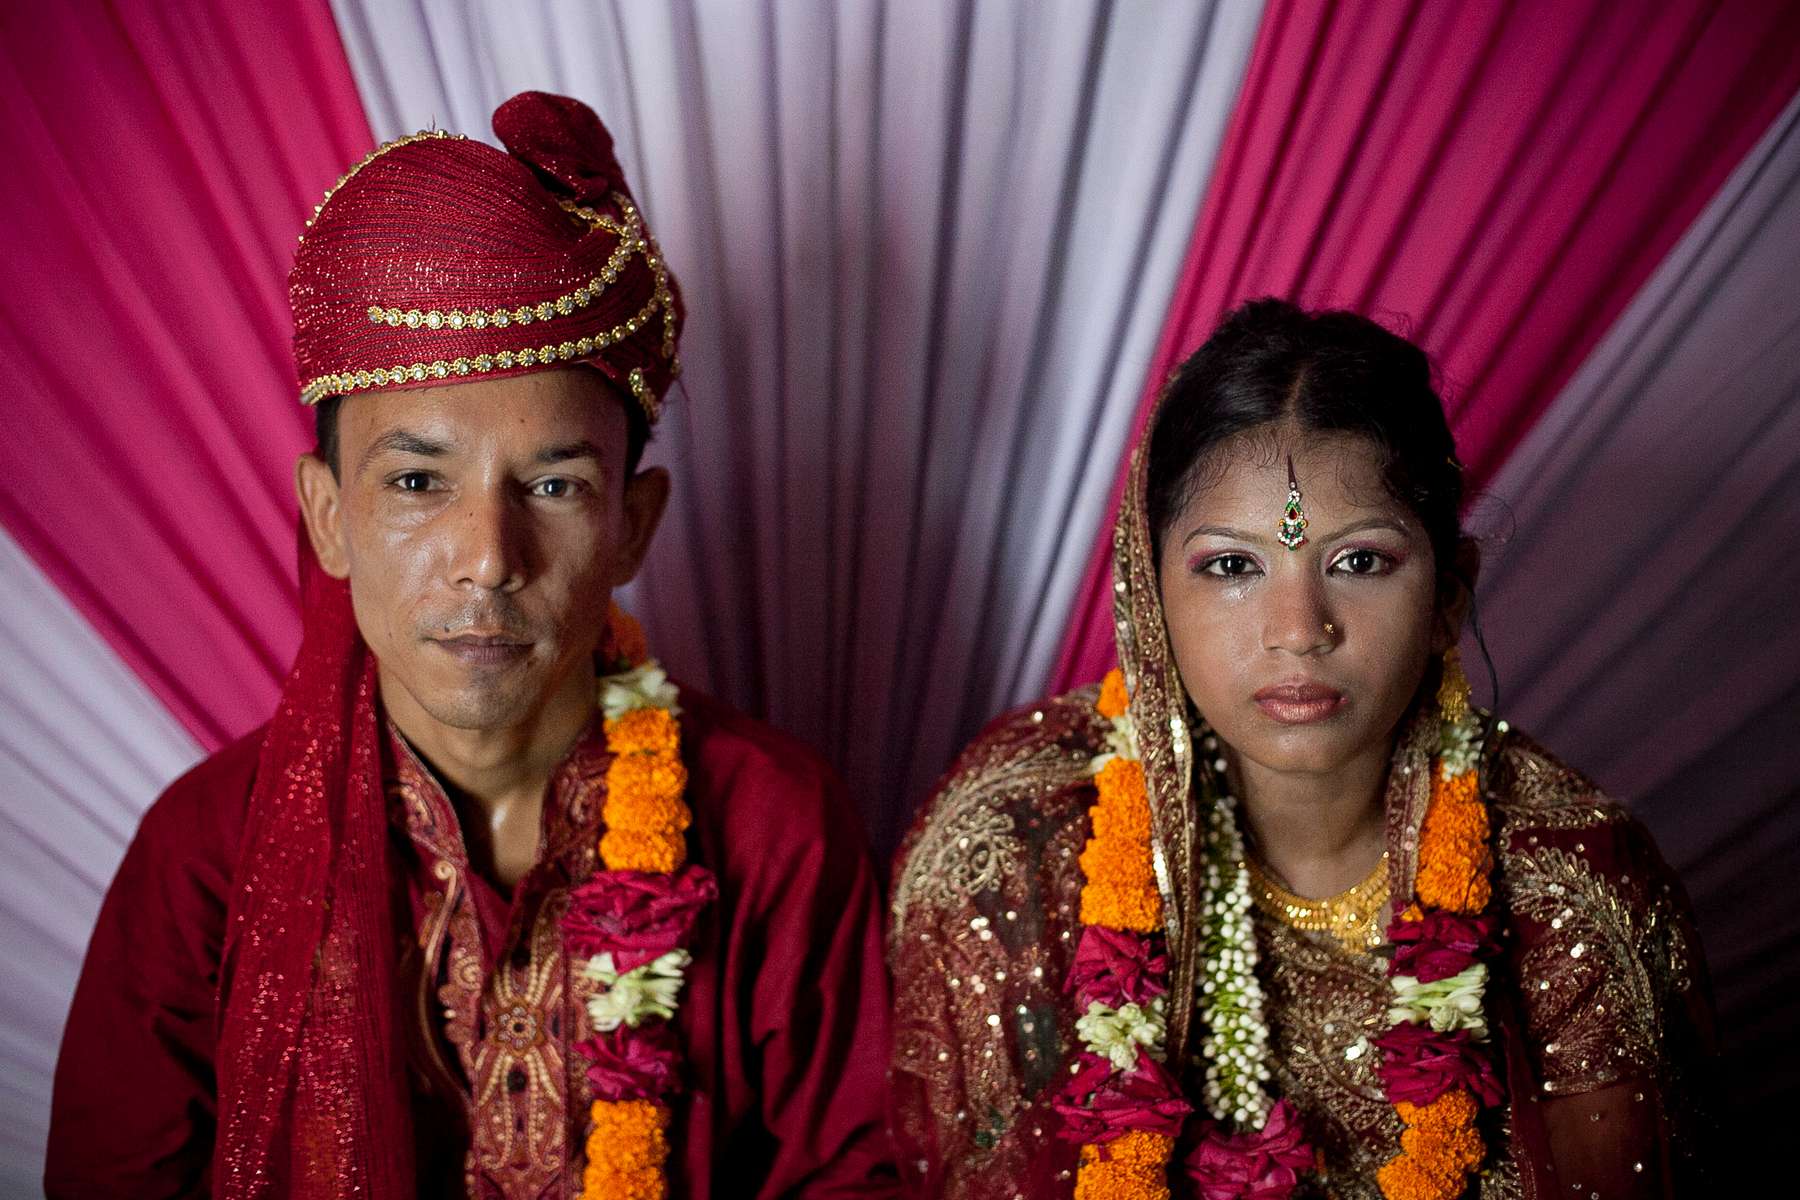 13 year old Runa Akhter sits next to her husband, 29 year old Zahrul Haque Kajal, the day of her wedding in Manikganj, Bangladesh. Runa was in the 7th grade, and loved reading, sports and traveling. She wanted to wait until she was 21 to get married but, {quote}No boy want's to marry a girl older than 18 in my village{quote} she said. 